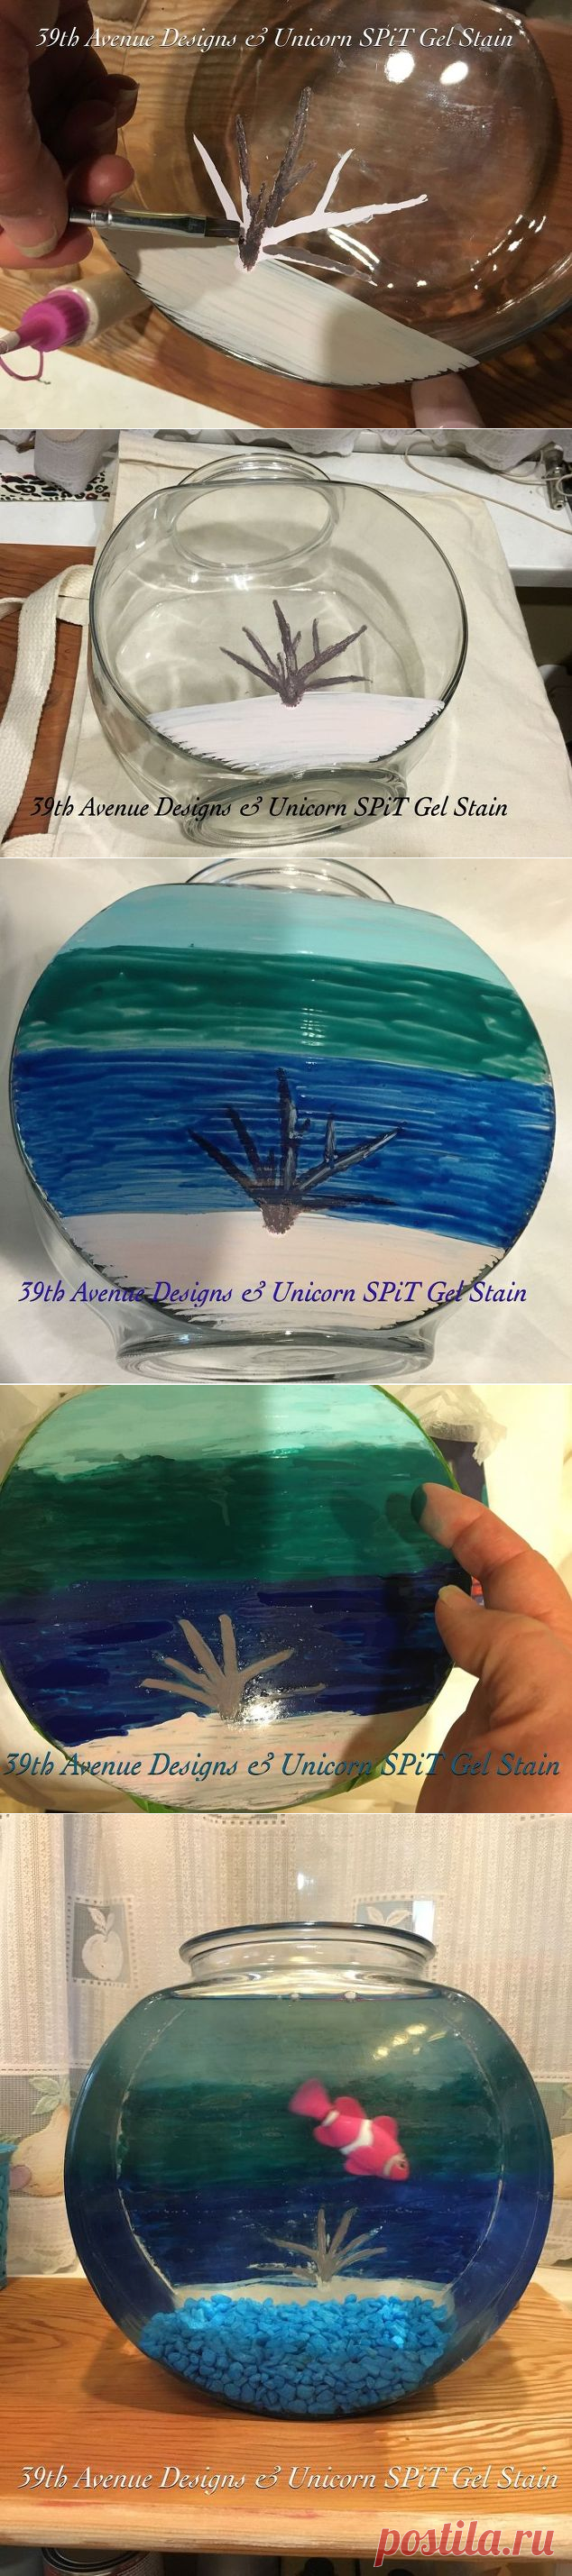 Glass Fish Bowl Gets Under the Sea View With Unicorn SPiT Gel Stain | Hometalk